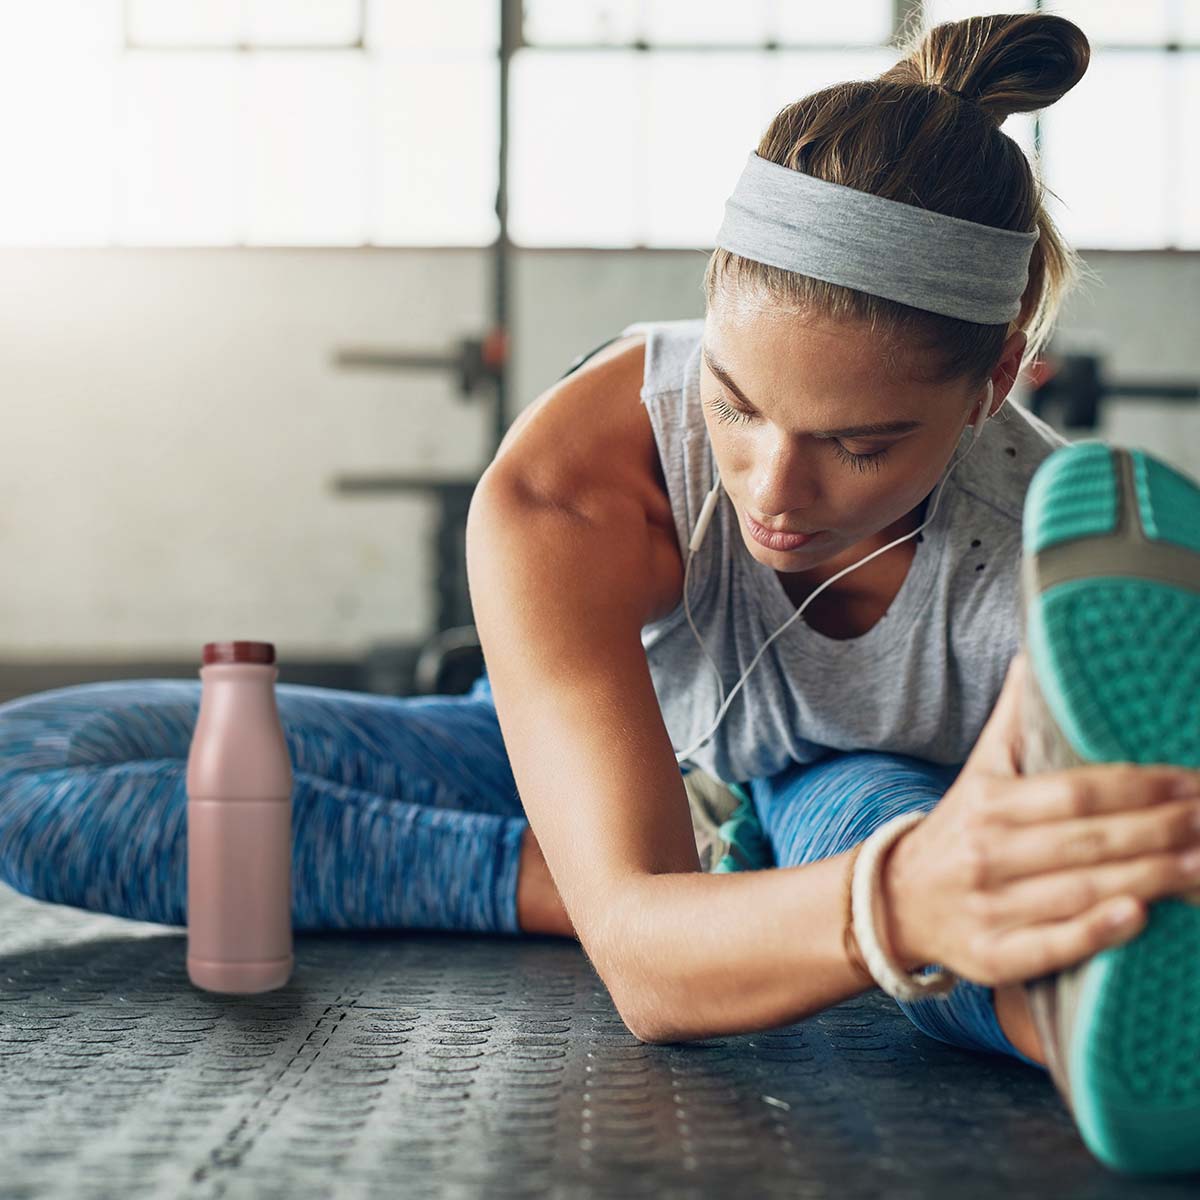 woman in workout clothes stretching her hamstring with a bottle of chocolate milk nearby